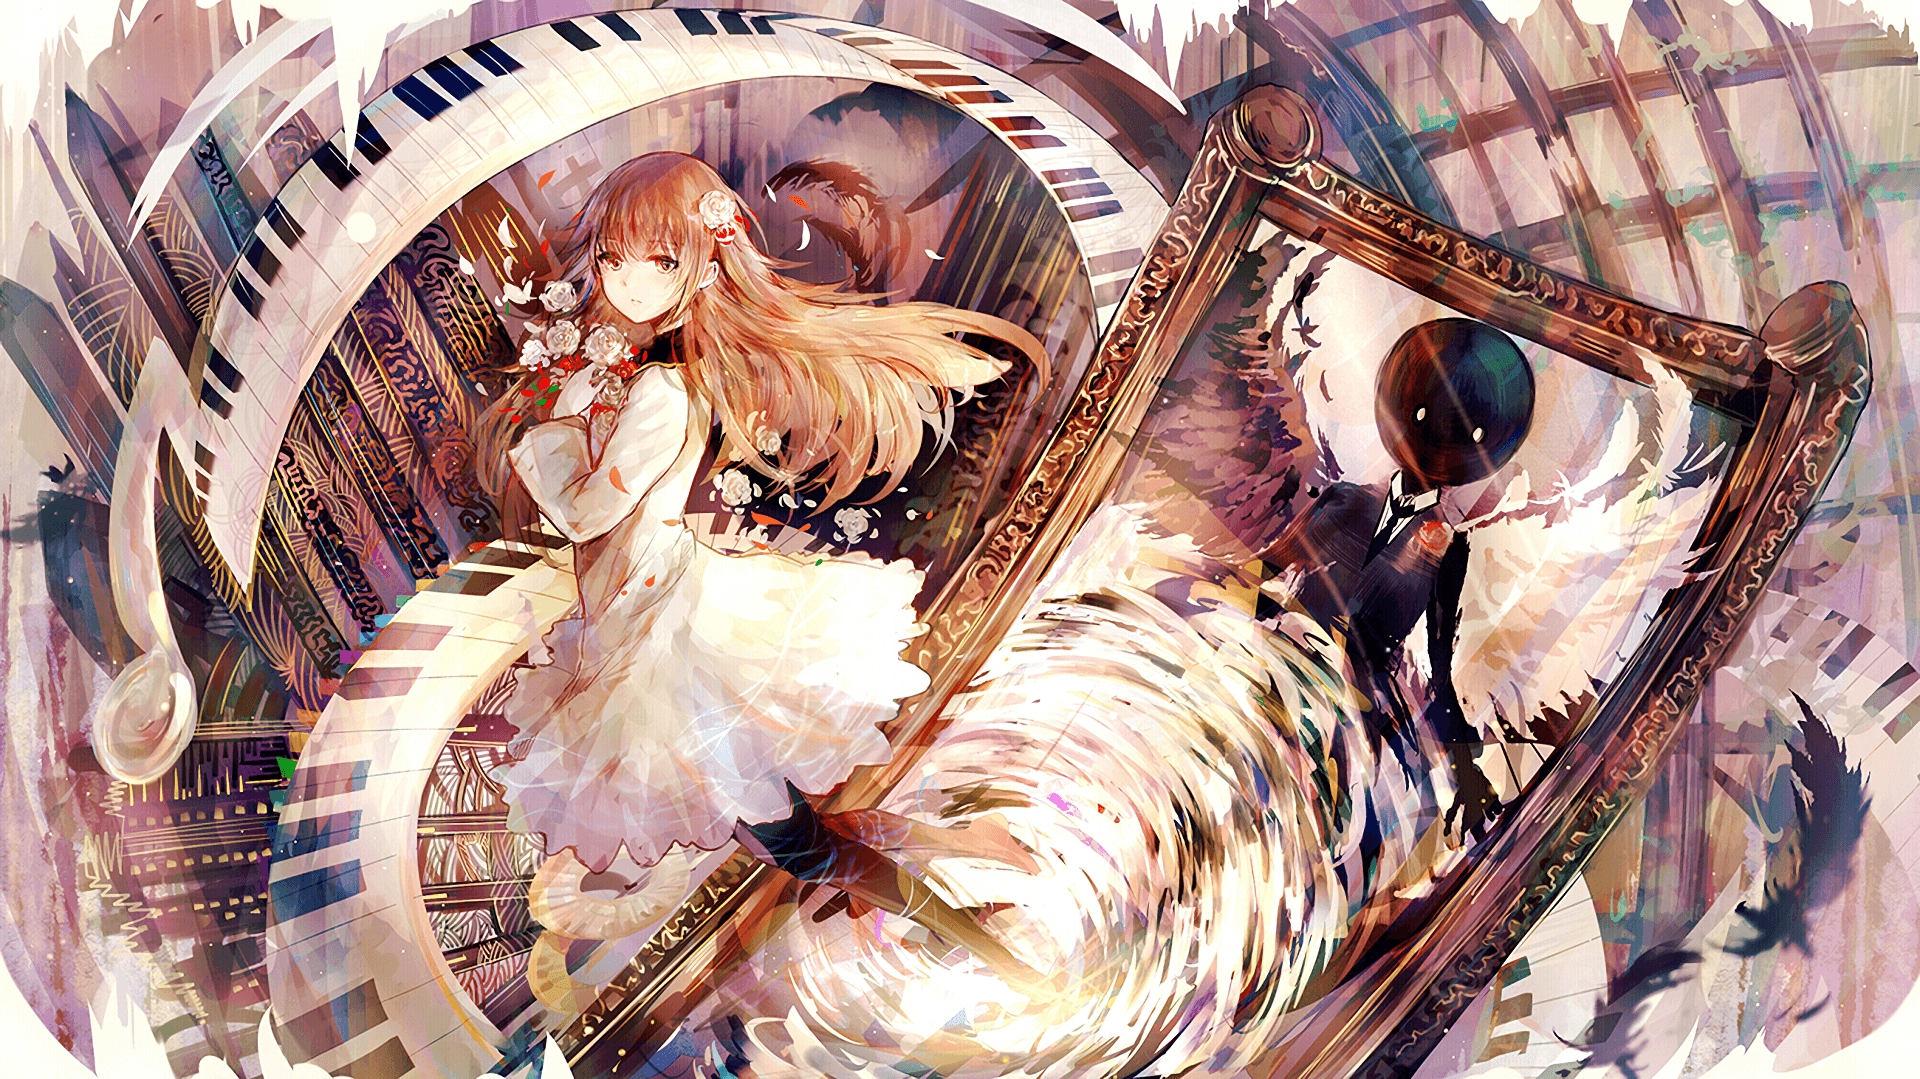 deemo download pc